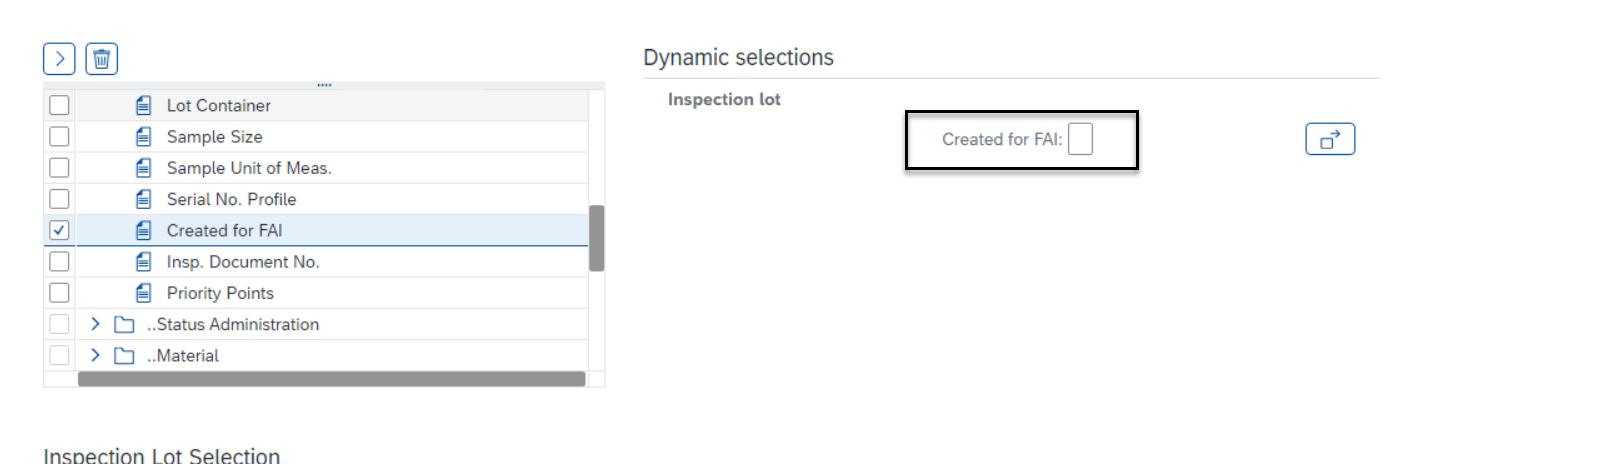 Dynamic selection Created for FAI available in transactions QA32 and QA33